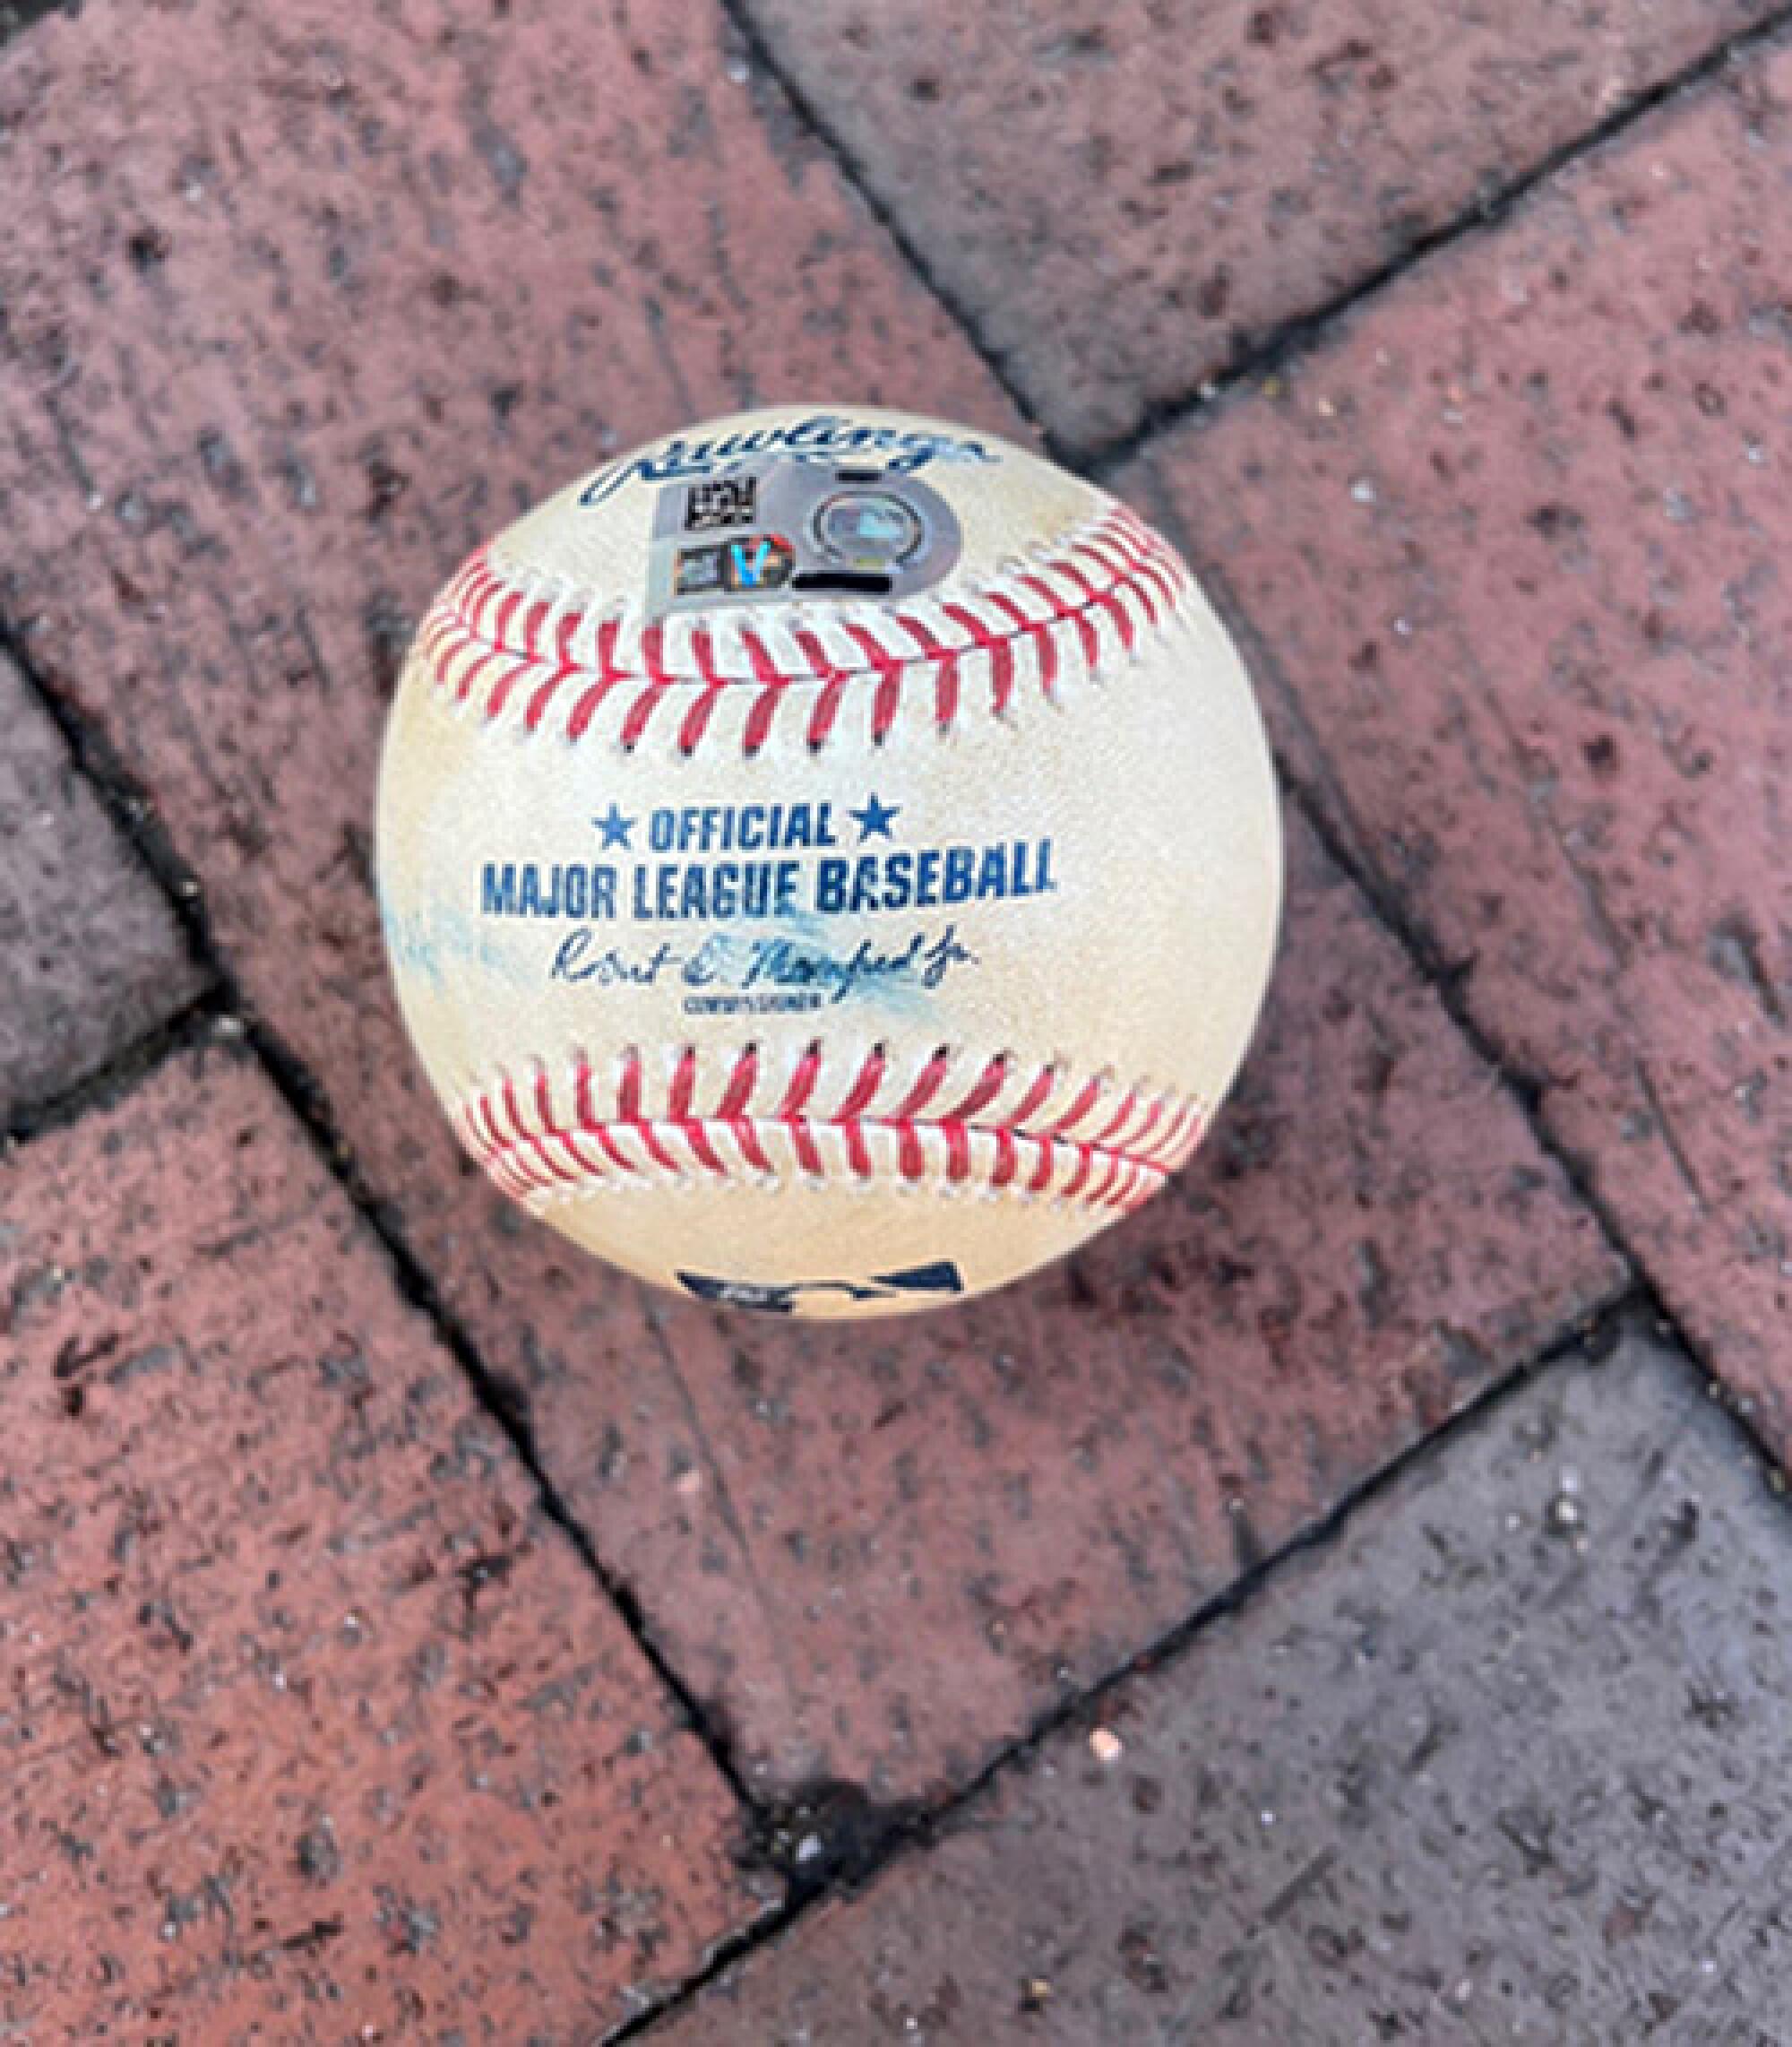 The current bid for Mike Trout's opening day home run ball is $7,010.00. The MLB hologram sticker authenticated the ball. 